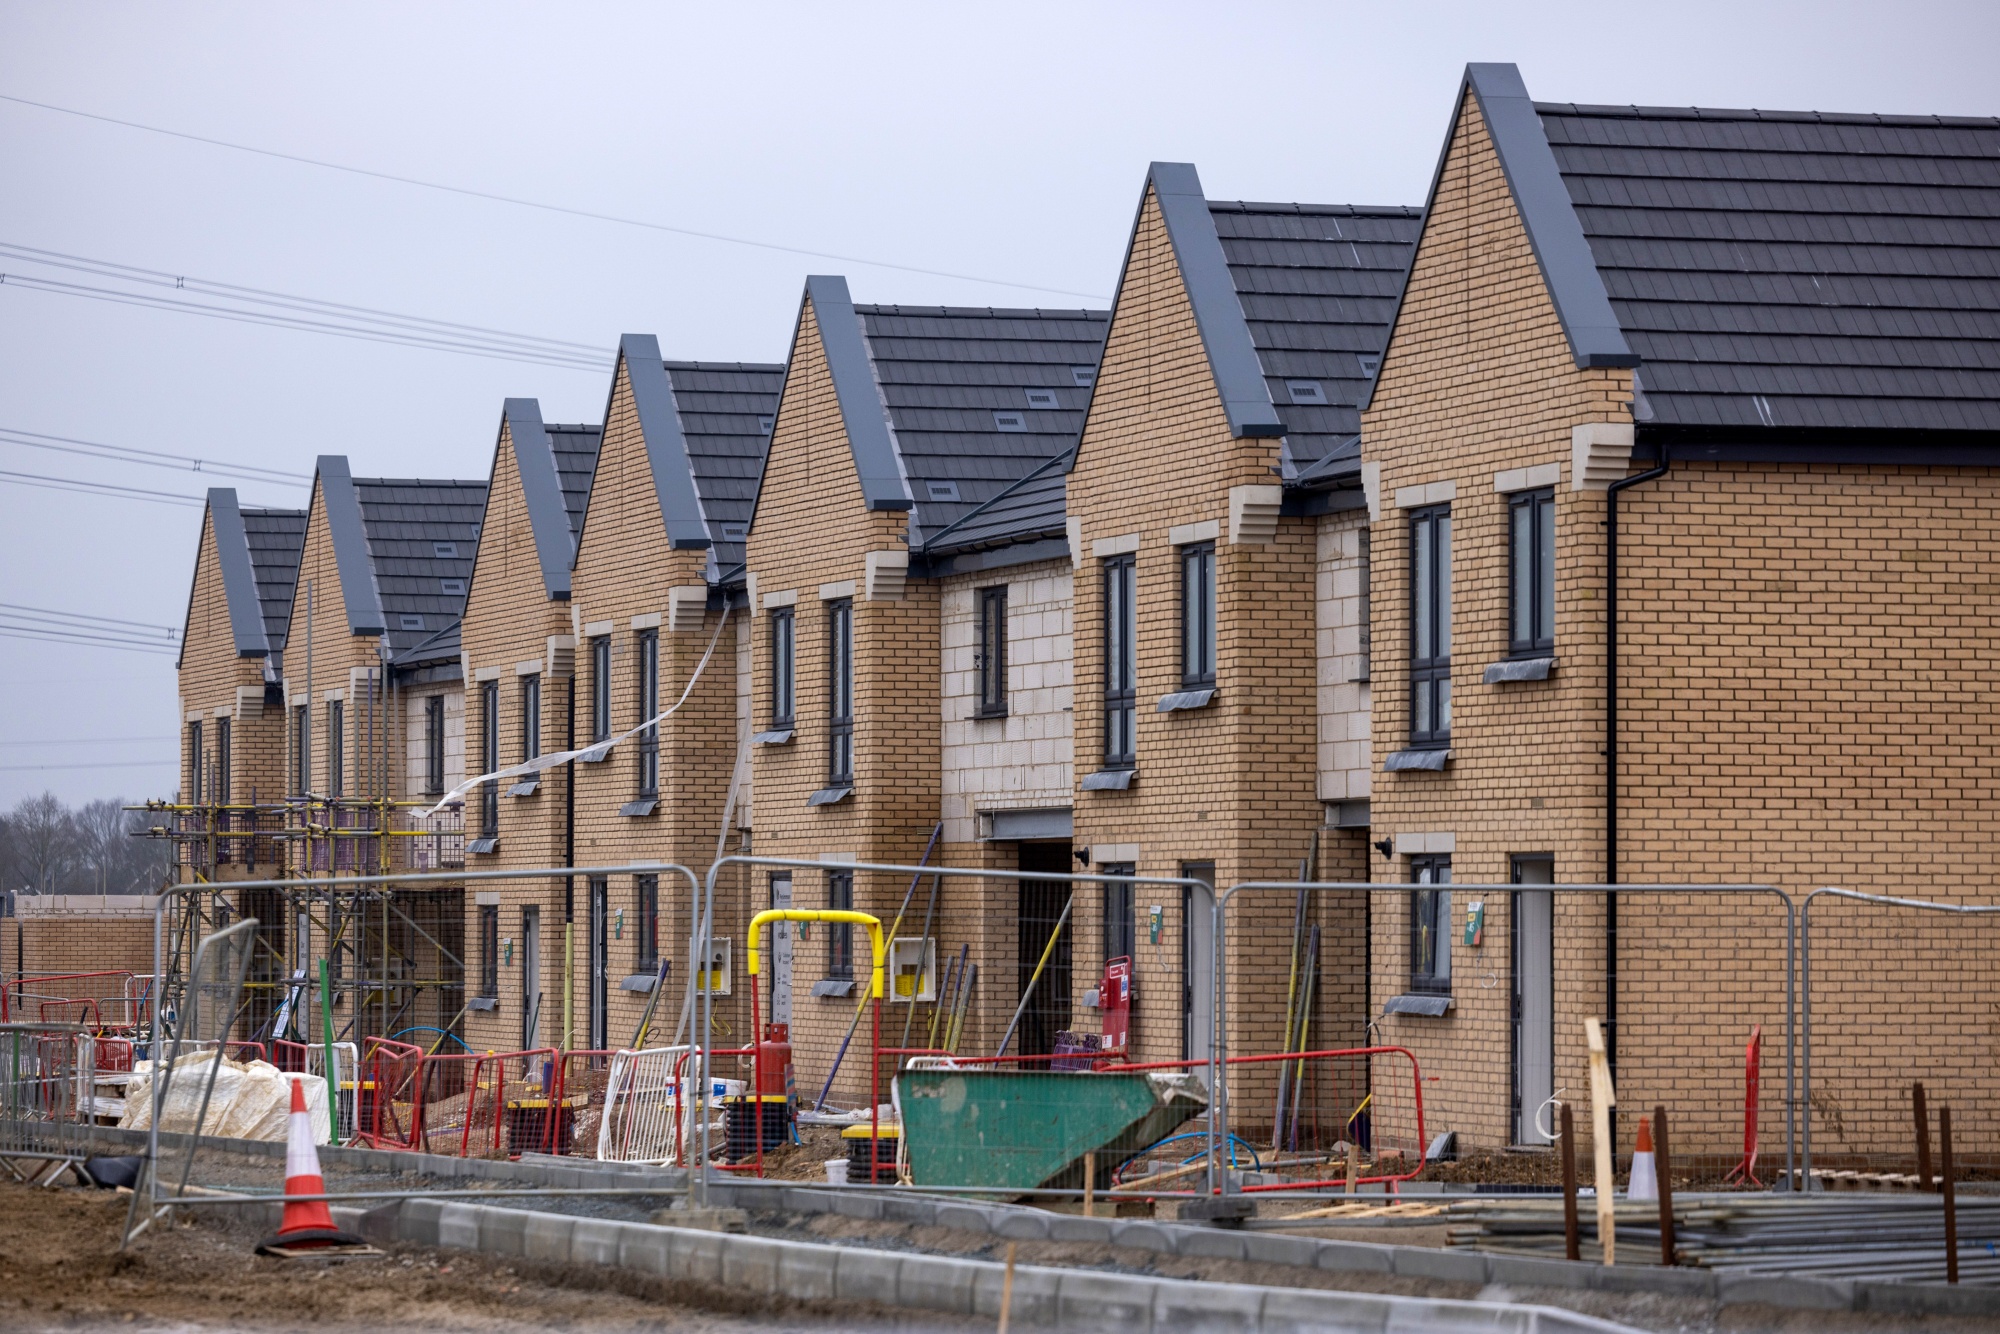 Persimmon Plc Residential Real Estate Construction Site Ahead Of Earnings